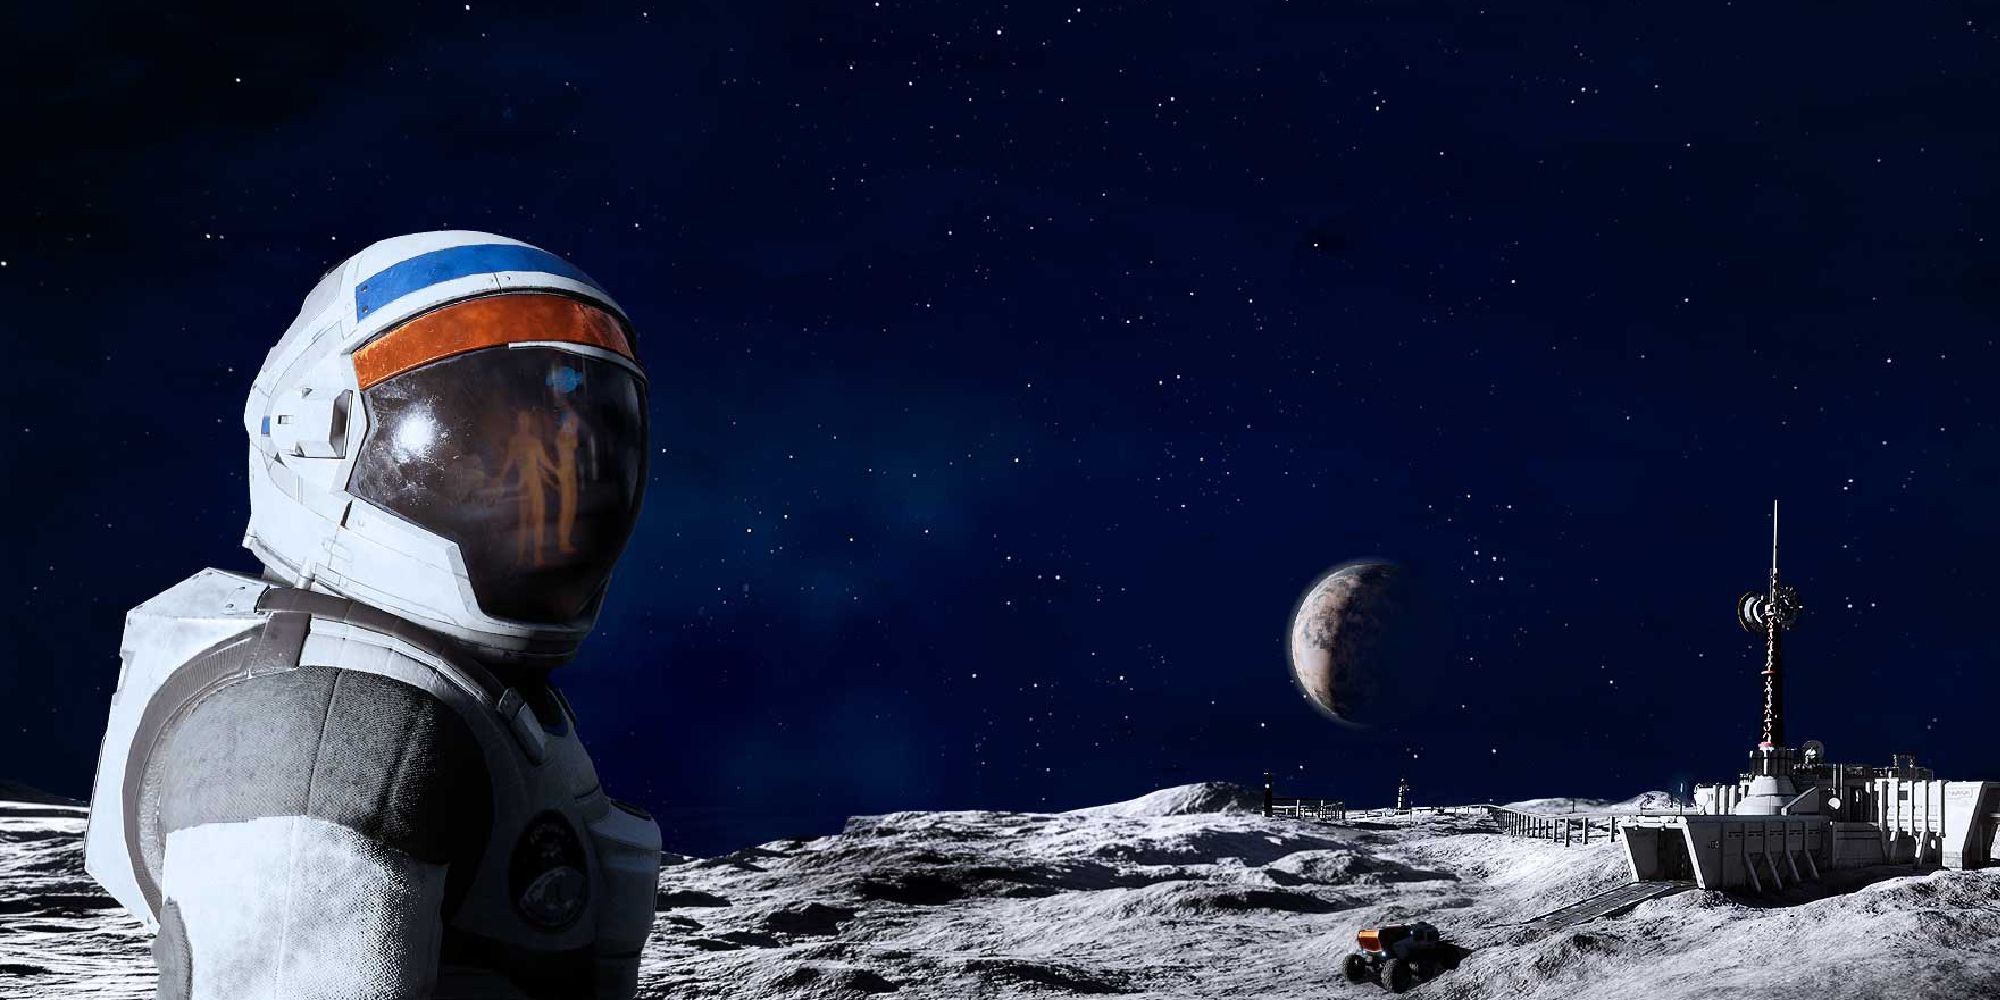 A screenshot of Deliver Us The Moon, showing the main character standing on the moon with ghostly silhouettes reflected in their spacesuit visor